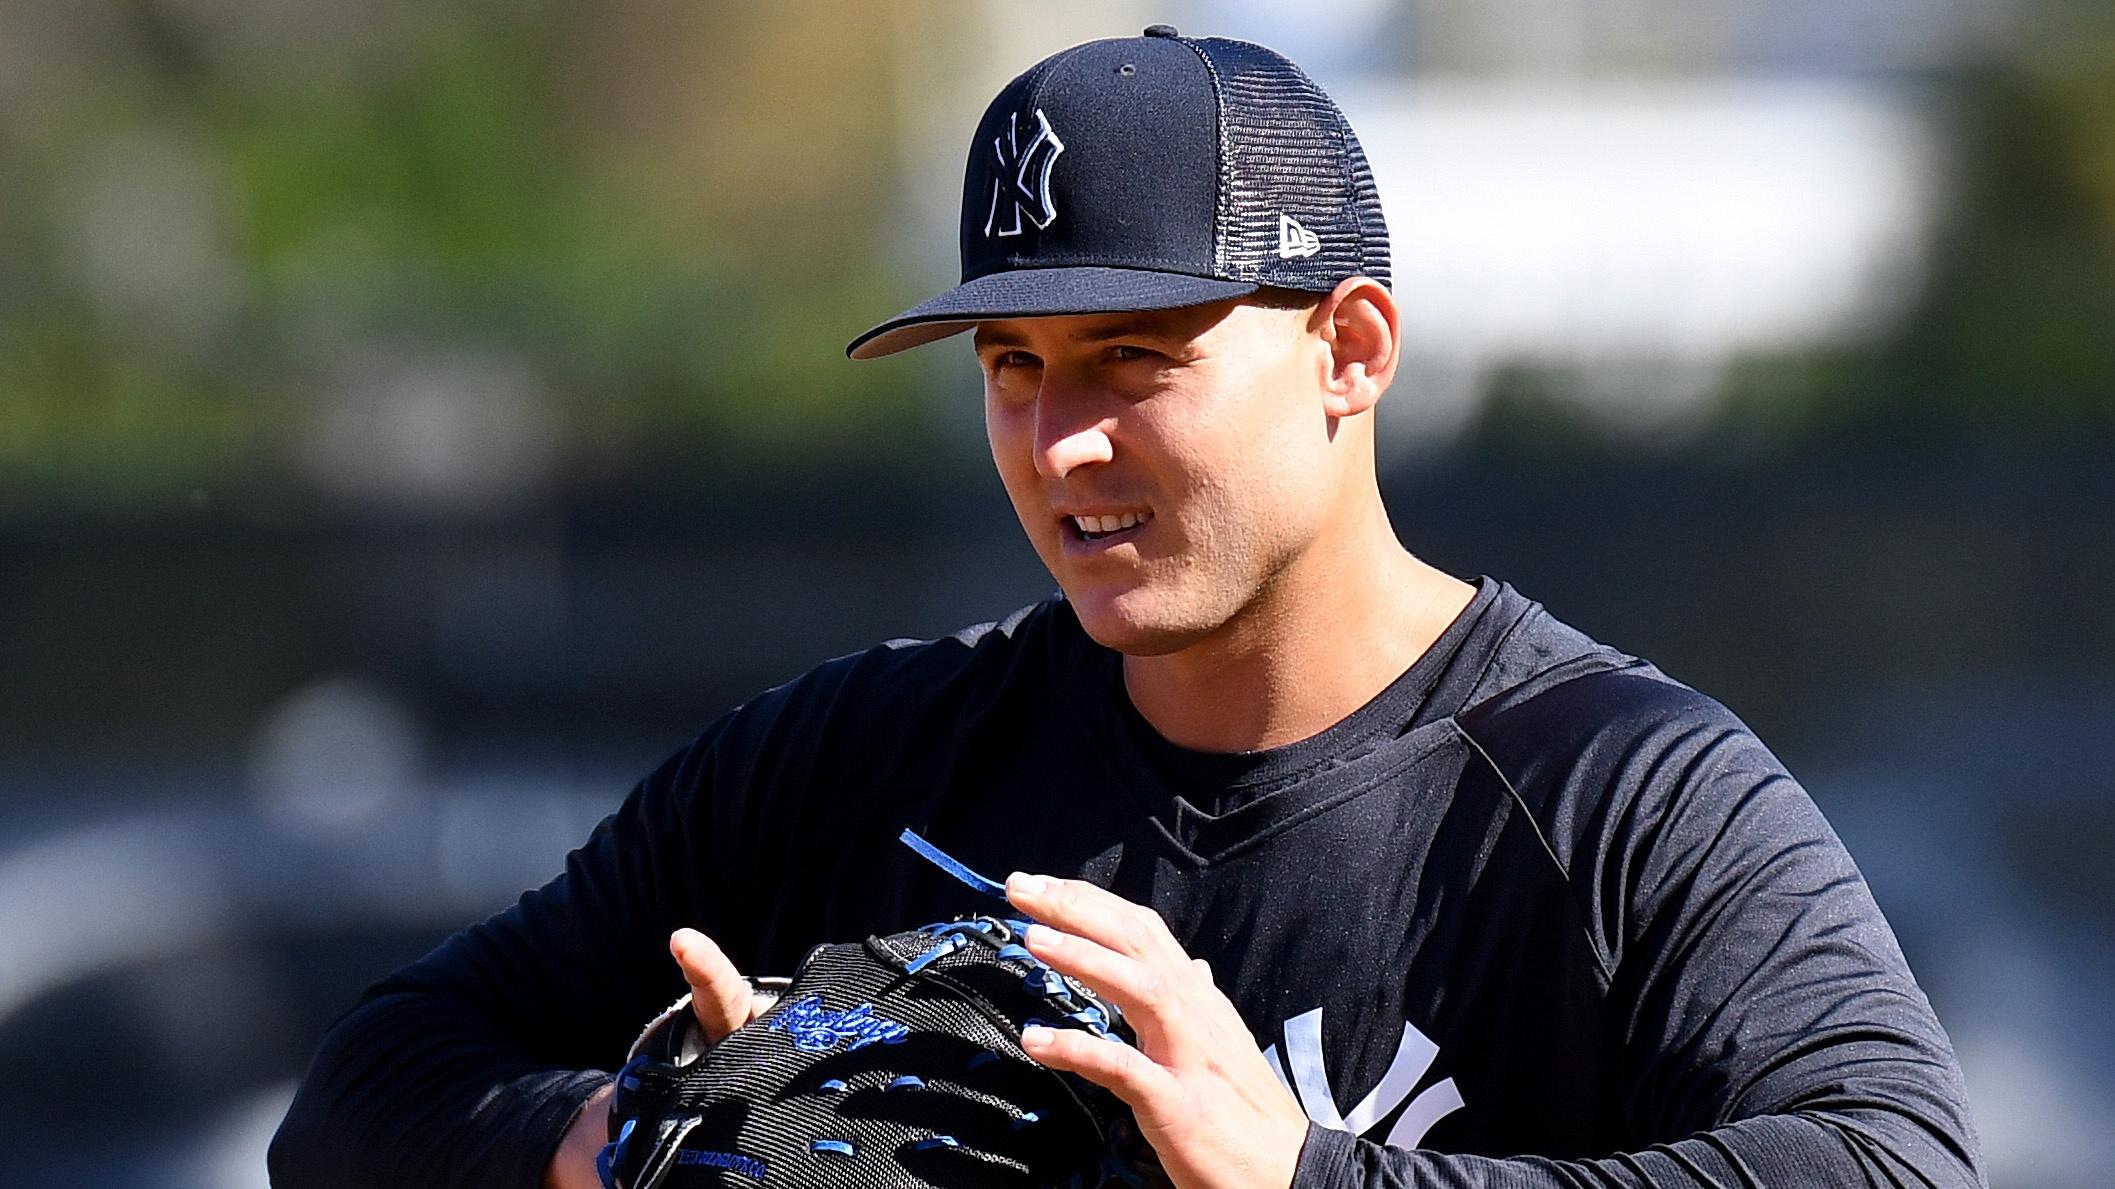 Mar 17, 2022; Tampa, FL, USA; New York Yankees infielder Anthony Rizzo (48) prepares to take infield practice during the spring training workout at George M. Steinbrenner Field. Mandatory Credit: Jonathan Dyer-USA TODAY Sports / © Jonathan Dyer-USA TODAY Sports